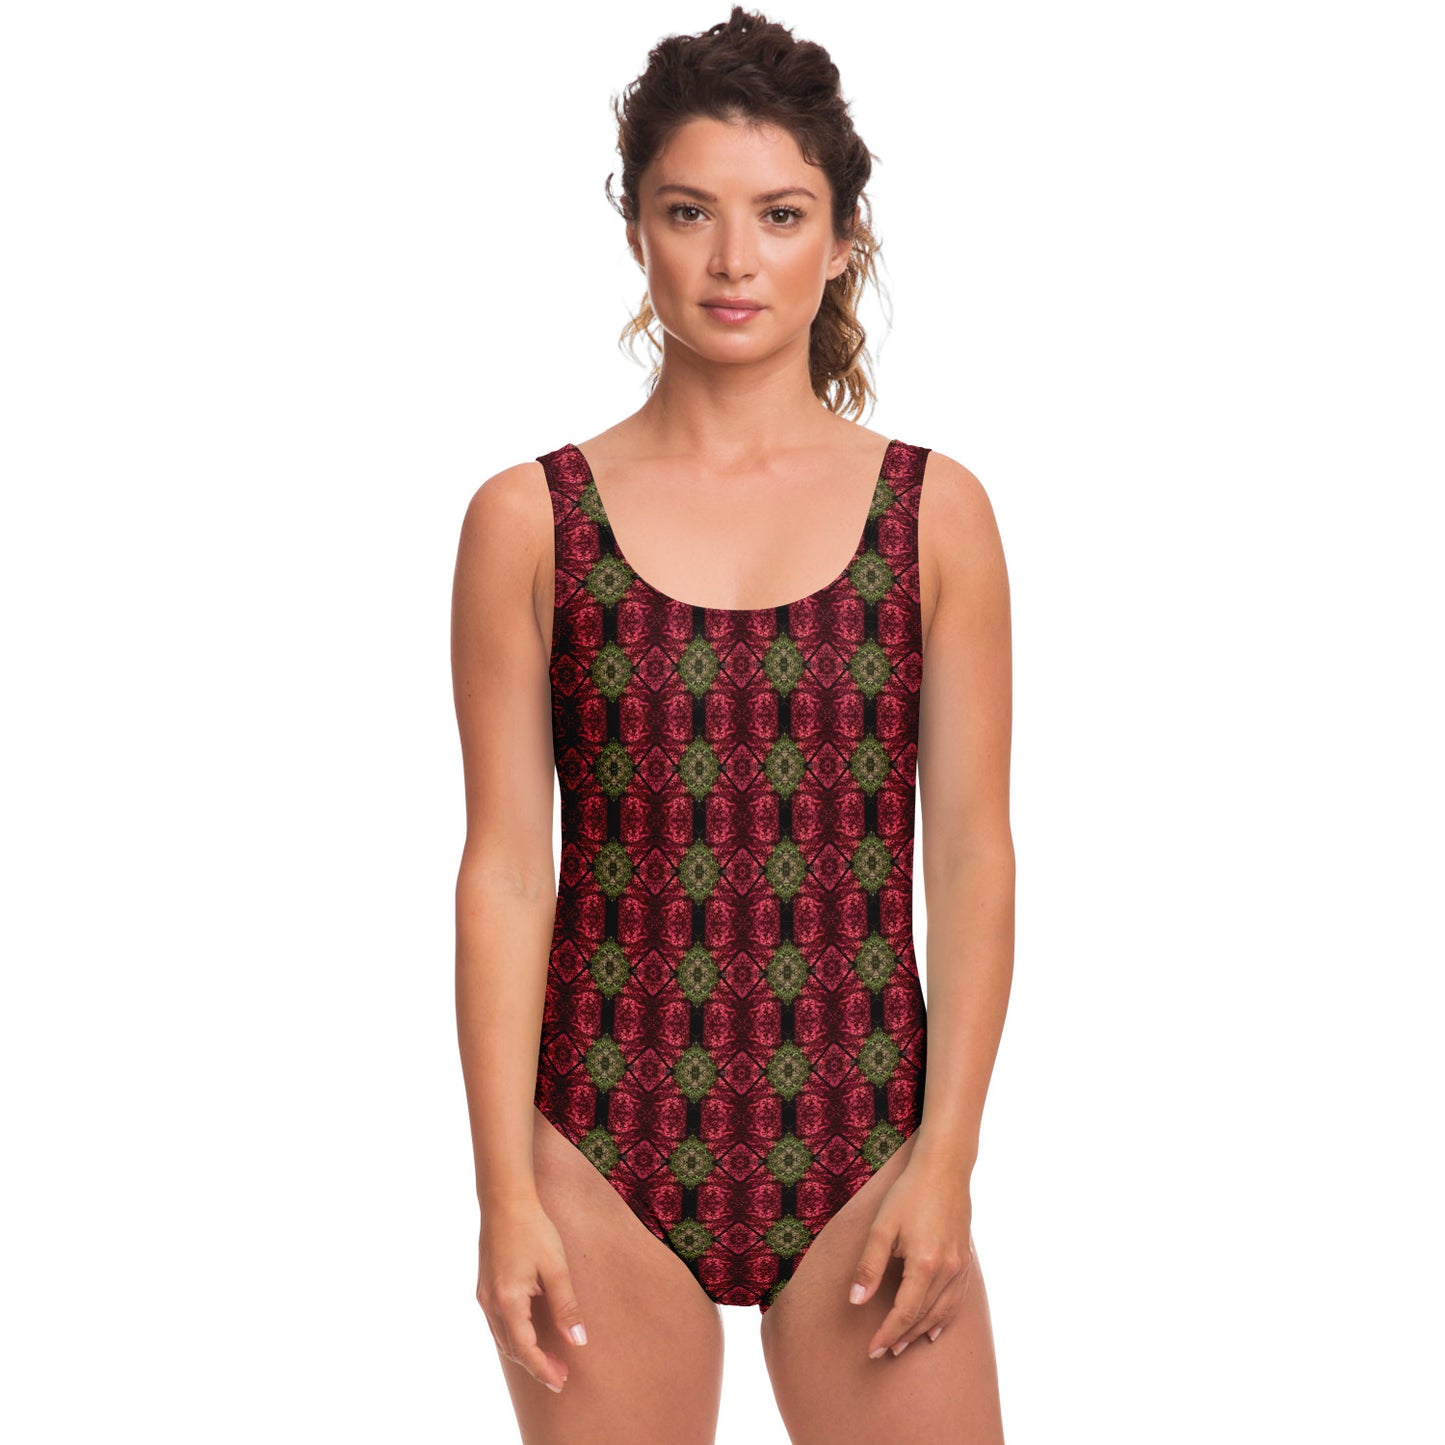 One-Piece Swimsuit Woman (Victorian No. 1)